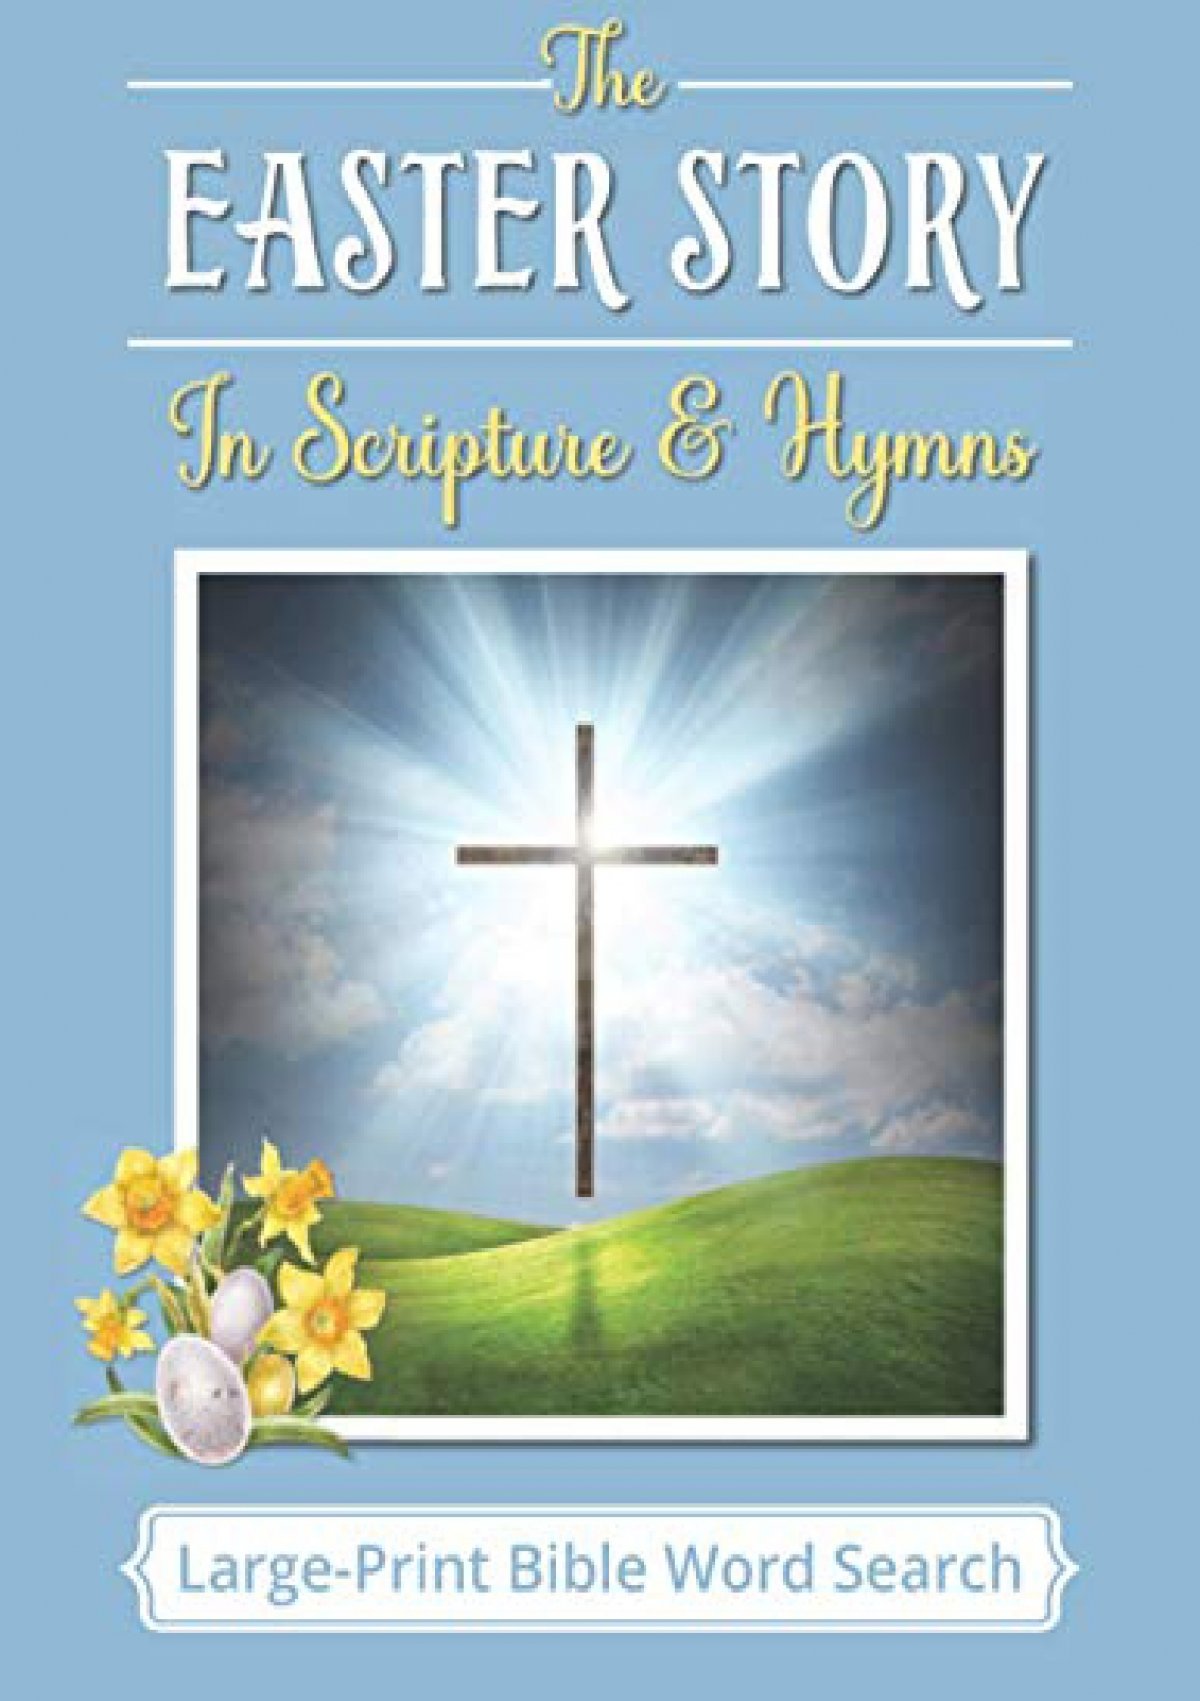 pdf-read-free-large-print-bible-word-search-the-easter-story-in